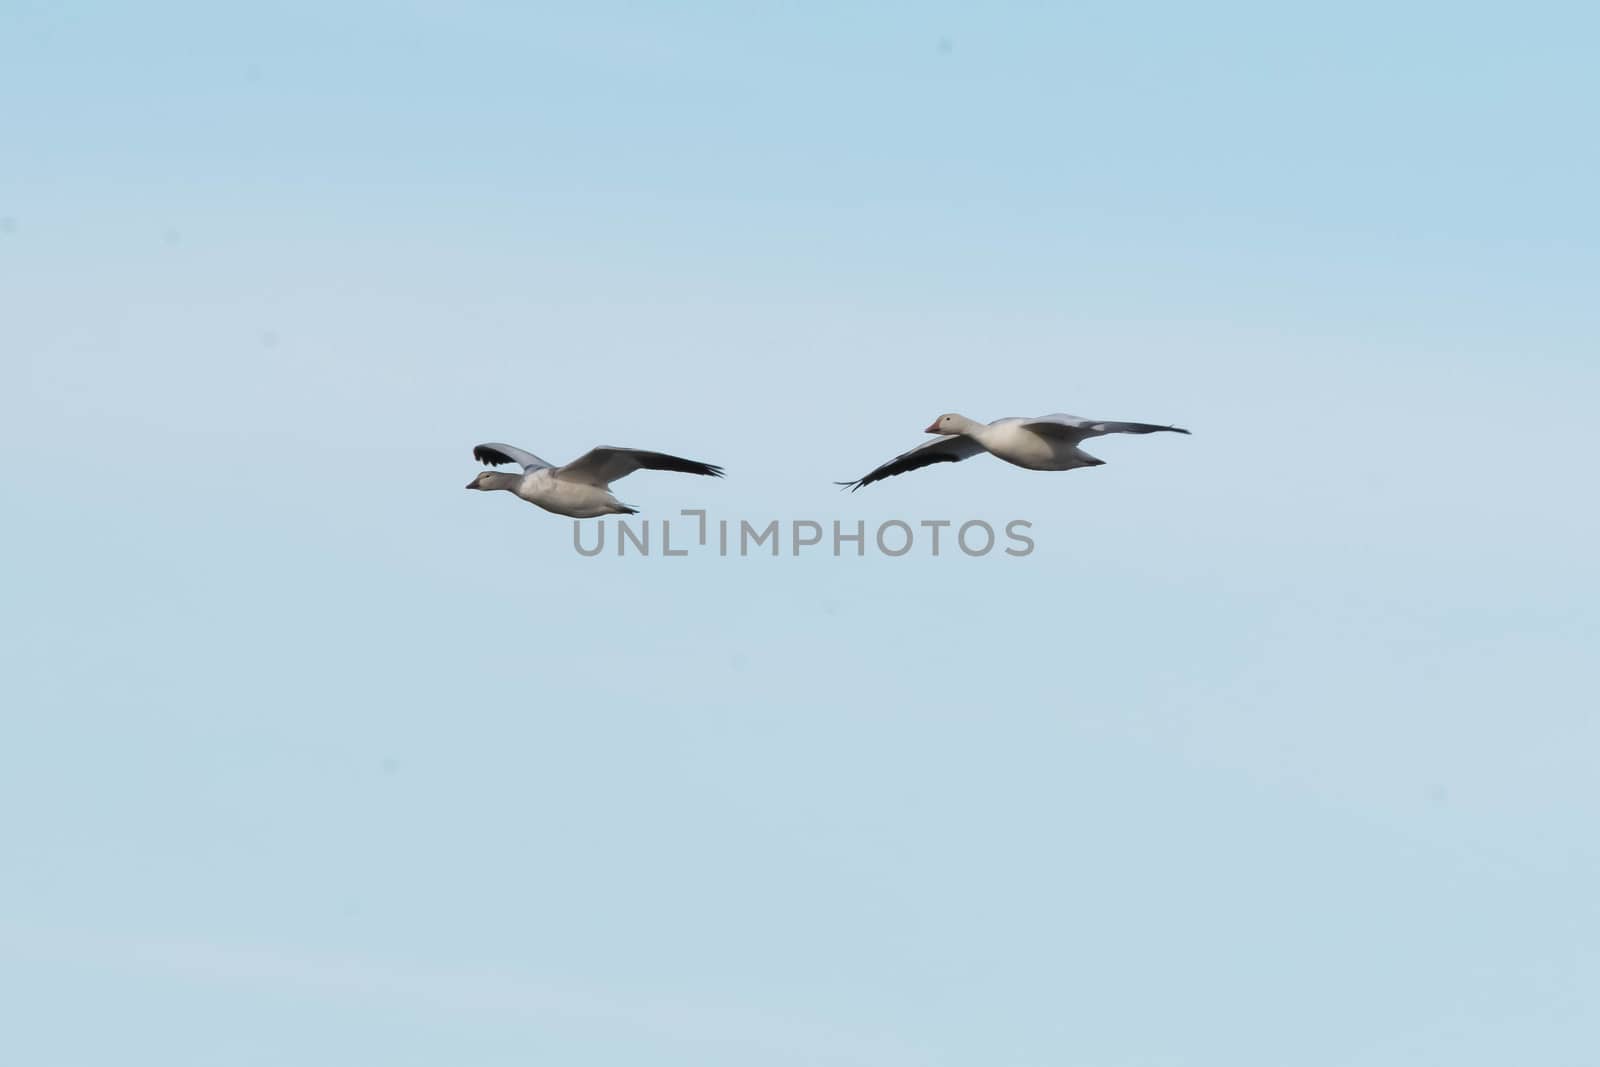 Snow Geese flying over Skagit Valley, WA by cestes001